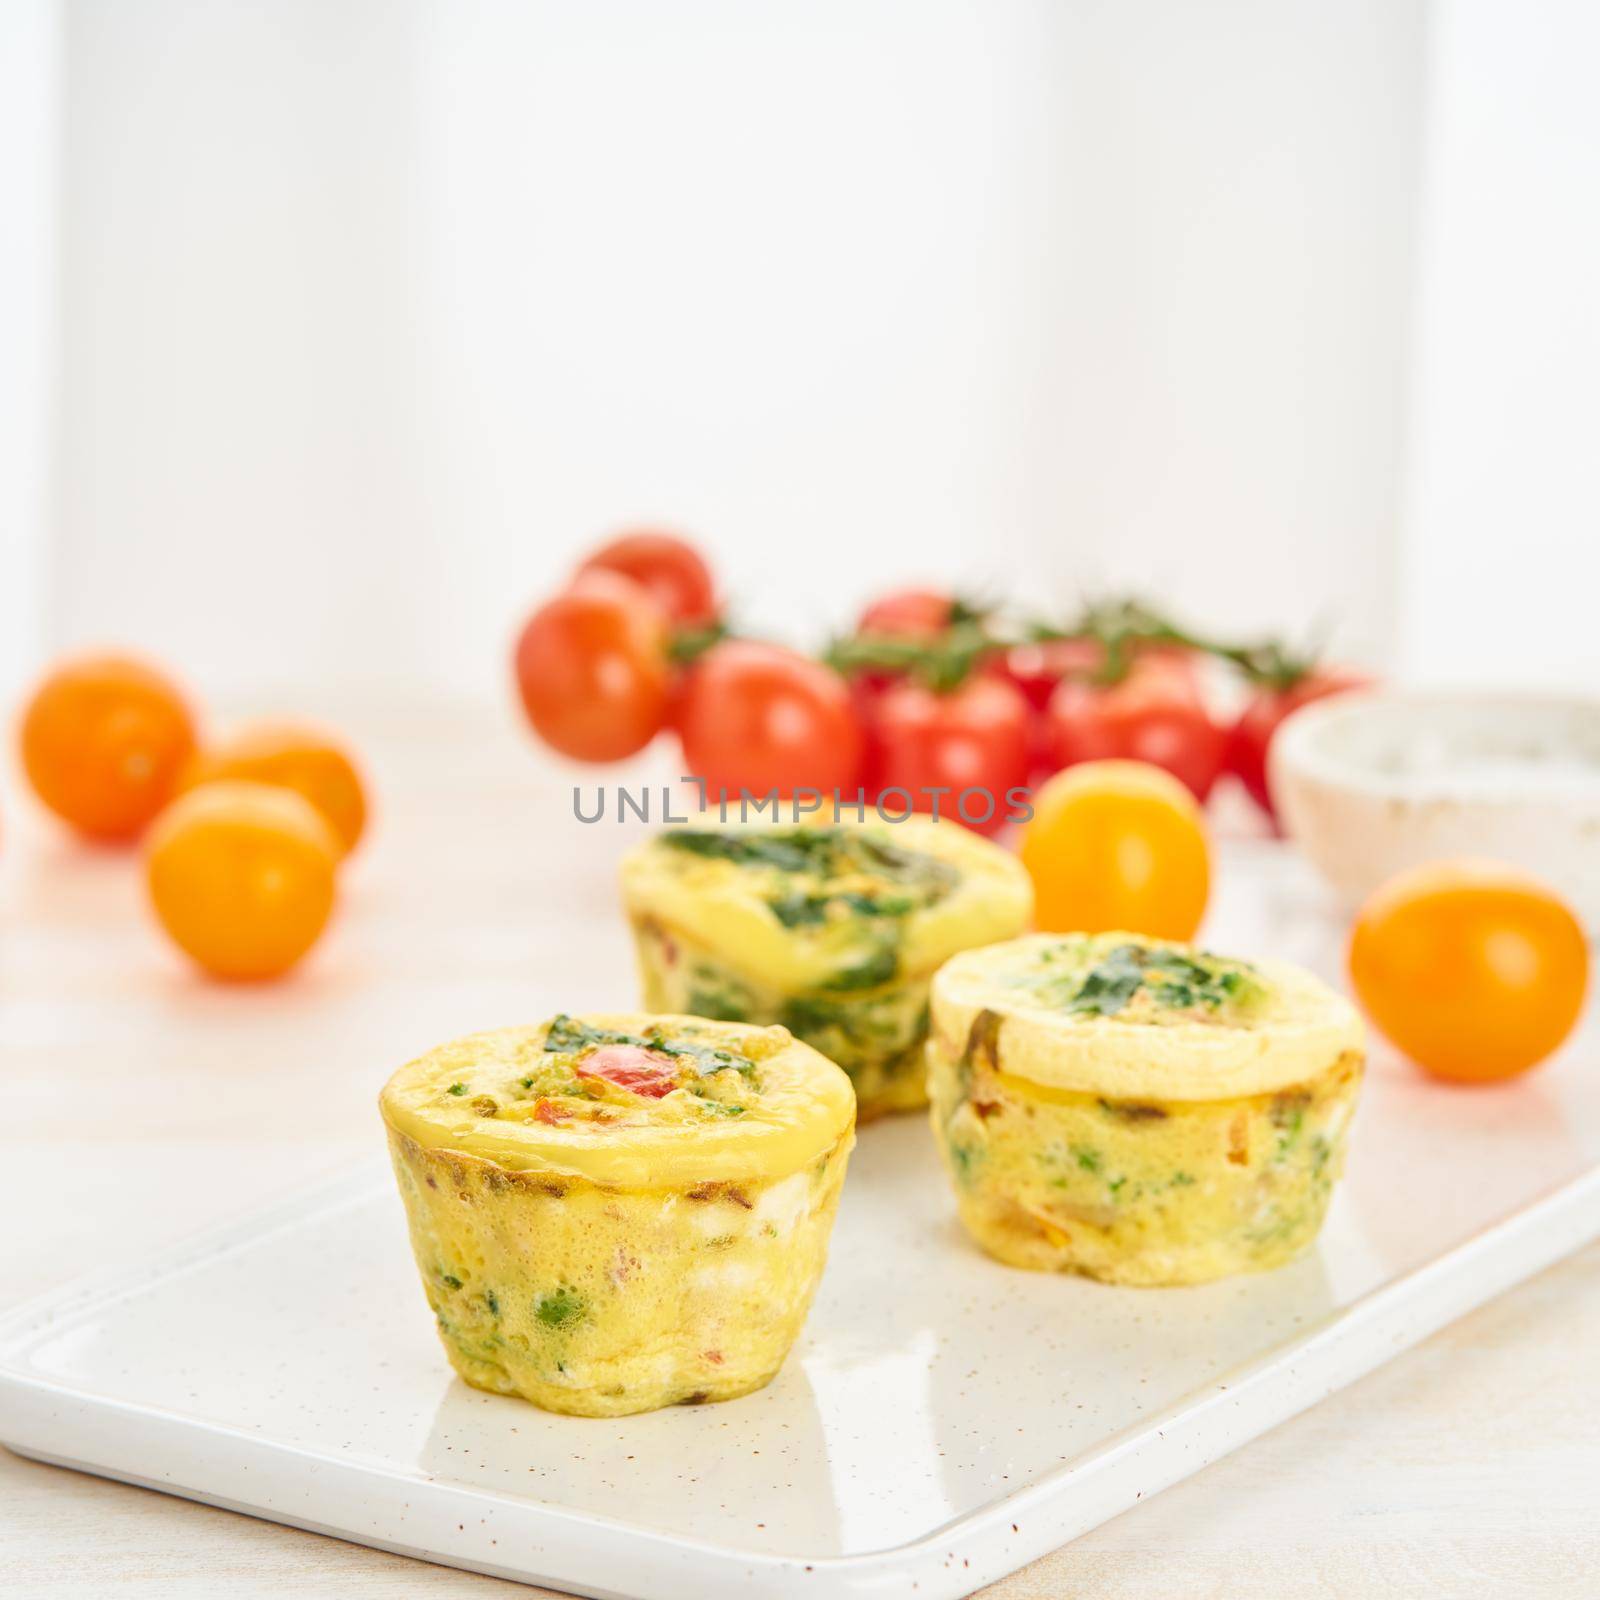 Egg muffins, paleo, keto diet. Omelet with spinach, vegetables, tomatoes baked in small molds by NataBene